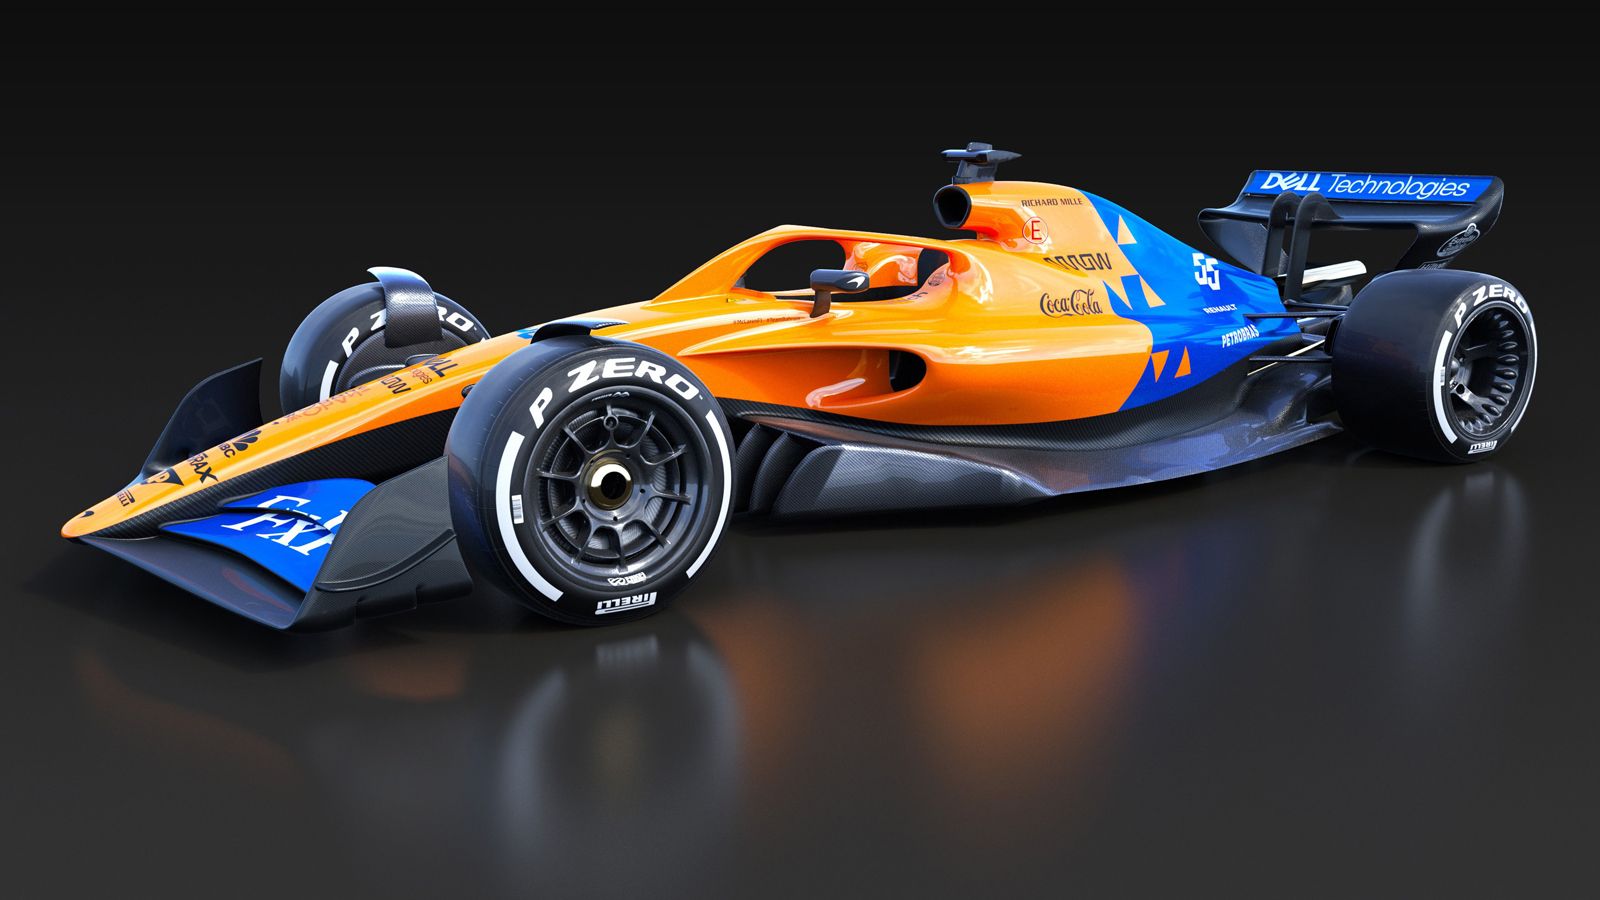 Formule 1 Auto 2021 Check Out The New Look Cars Budget Cap Confirmed For 2021 F1 Season